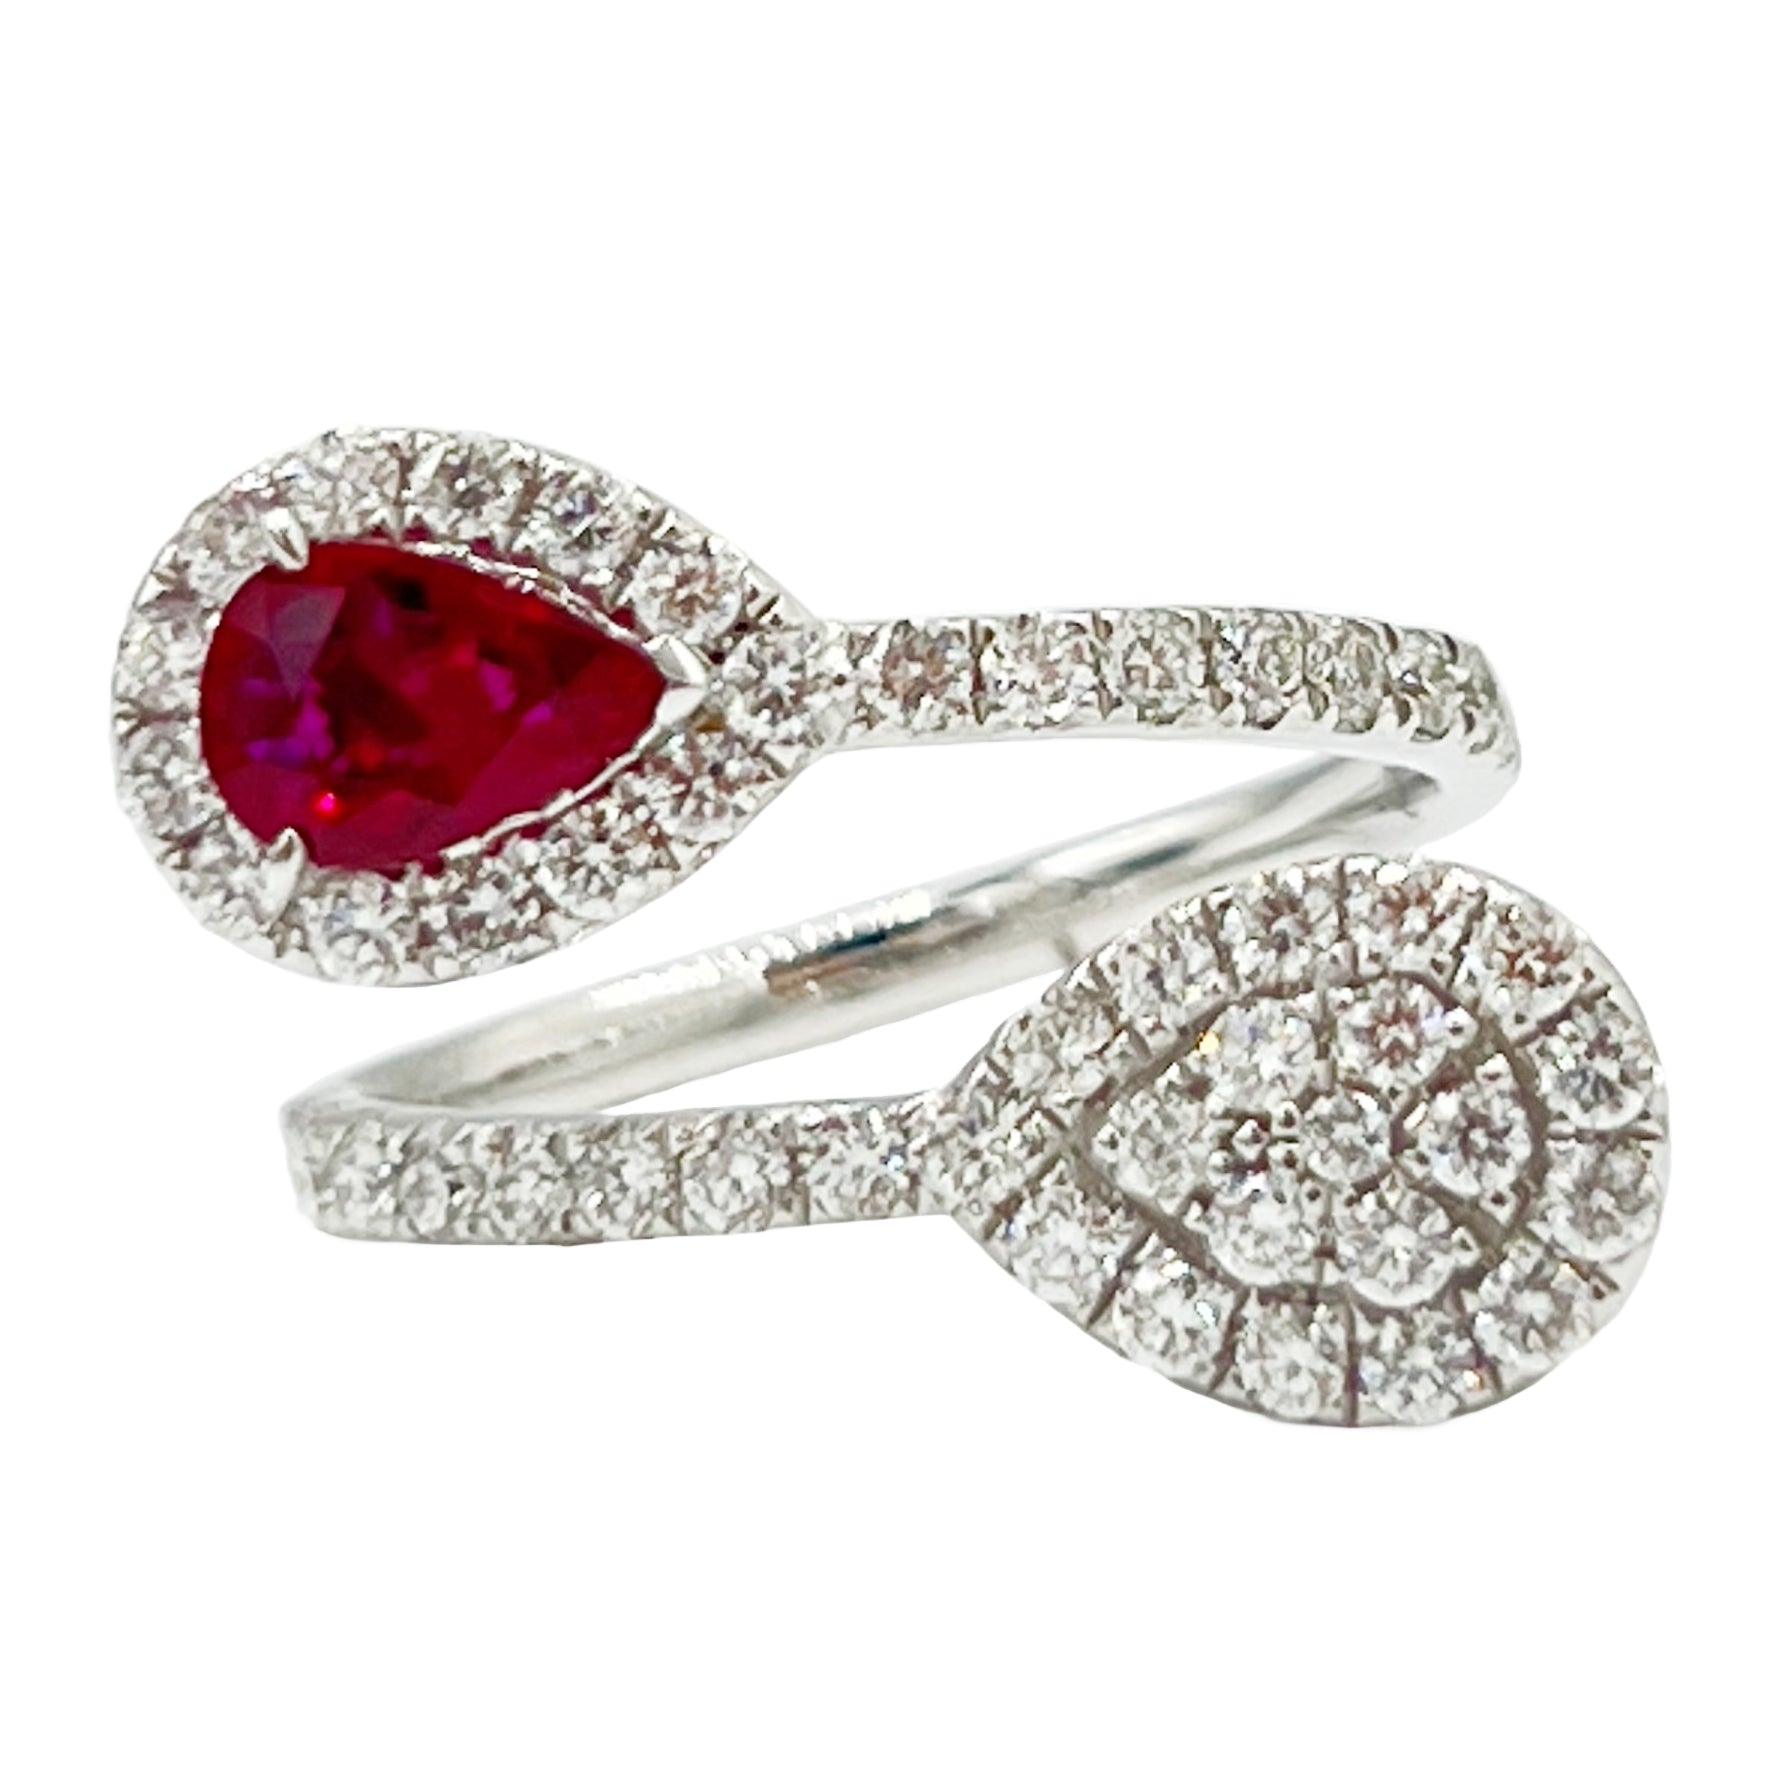 Ring 18KW/3.8G 1RUBY-0.67CT 49RD-0.85CT